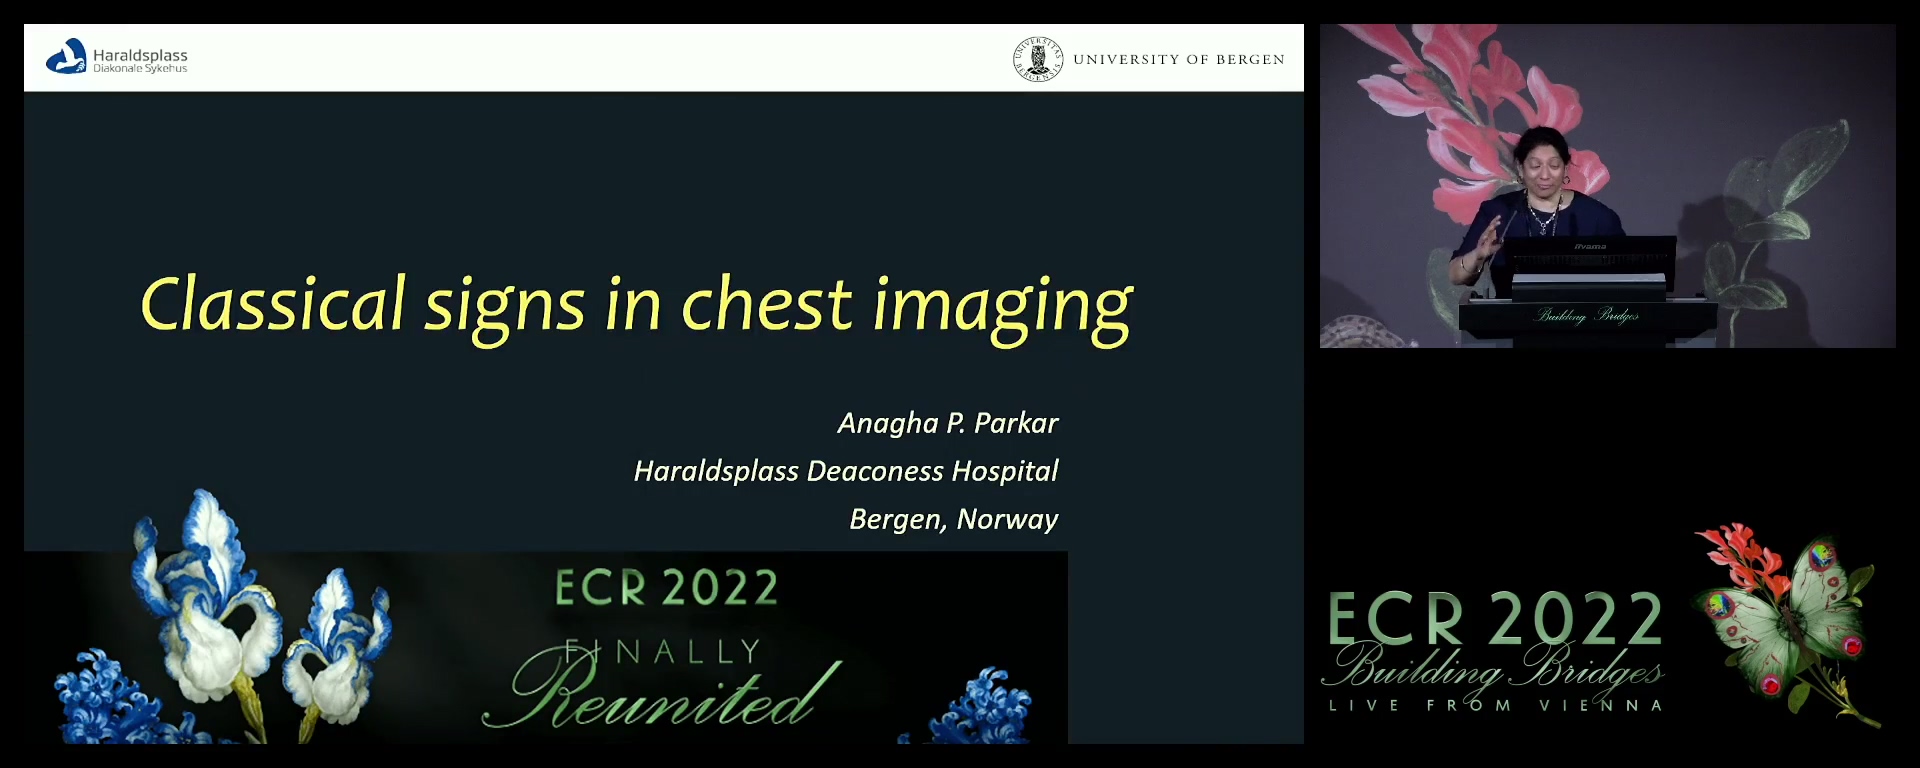 Classical signs in chest imaging